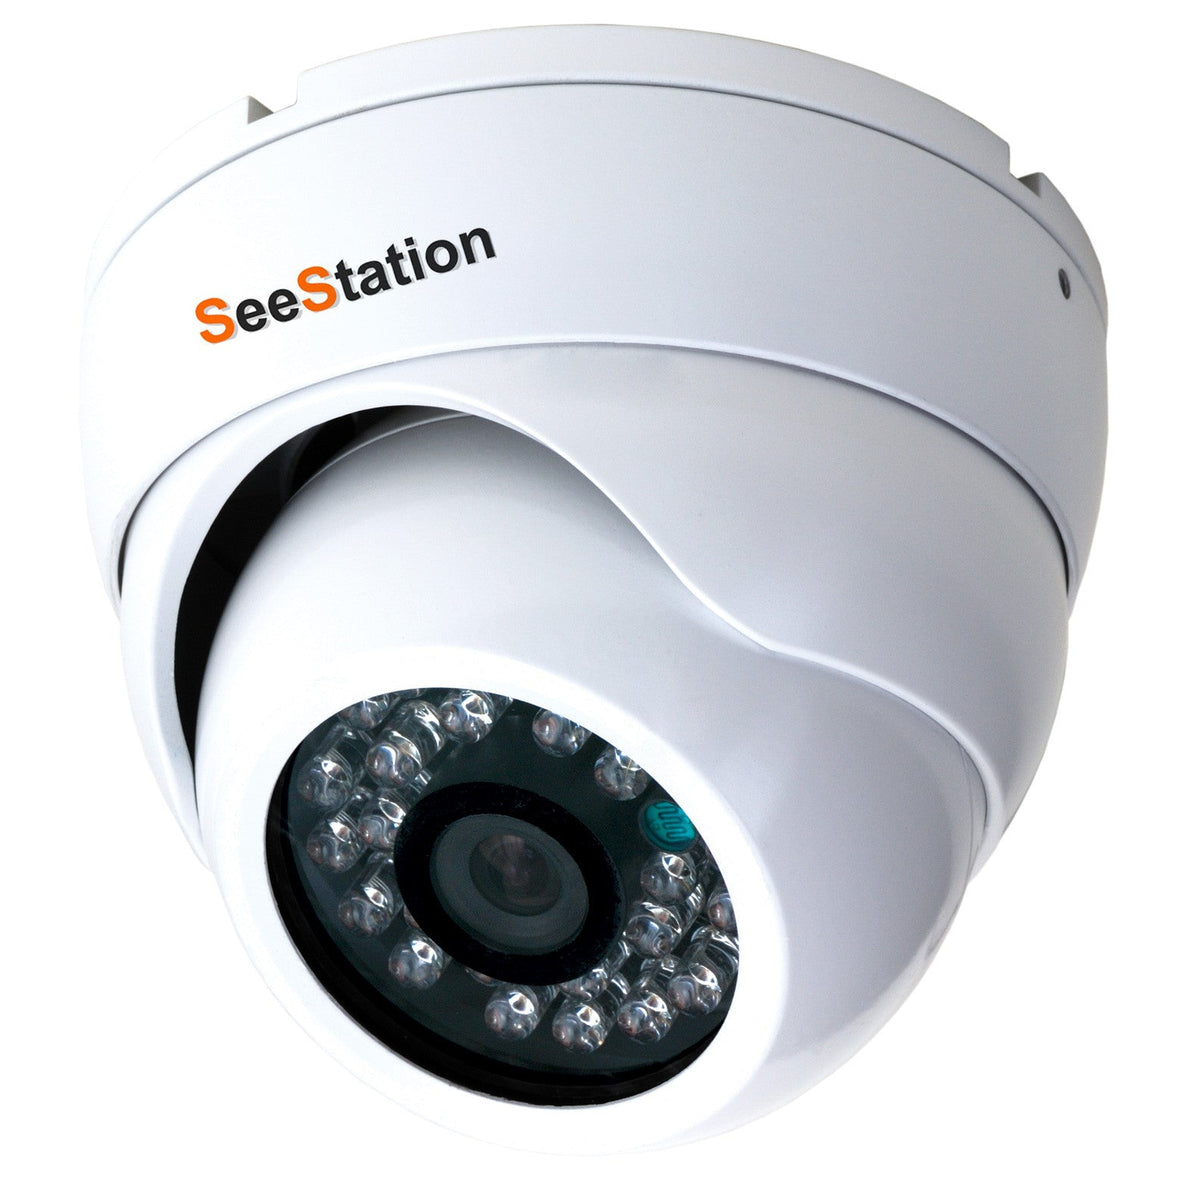 SeeStation (AHD) DOME CAMERA 1MP/720P 3.6mm Analog High Definition Aut ...